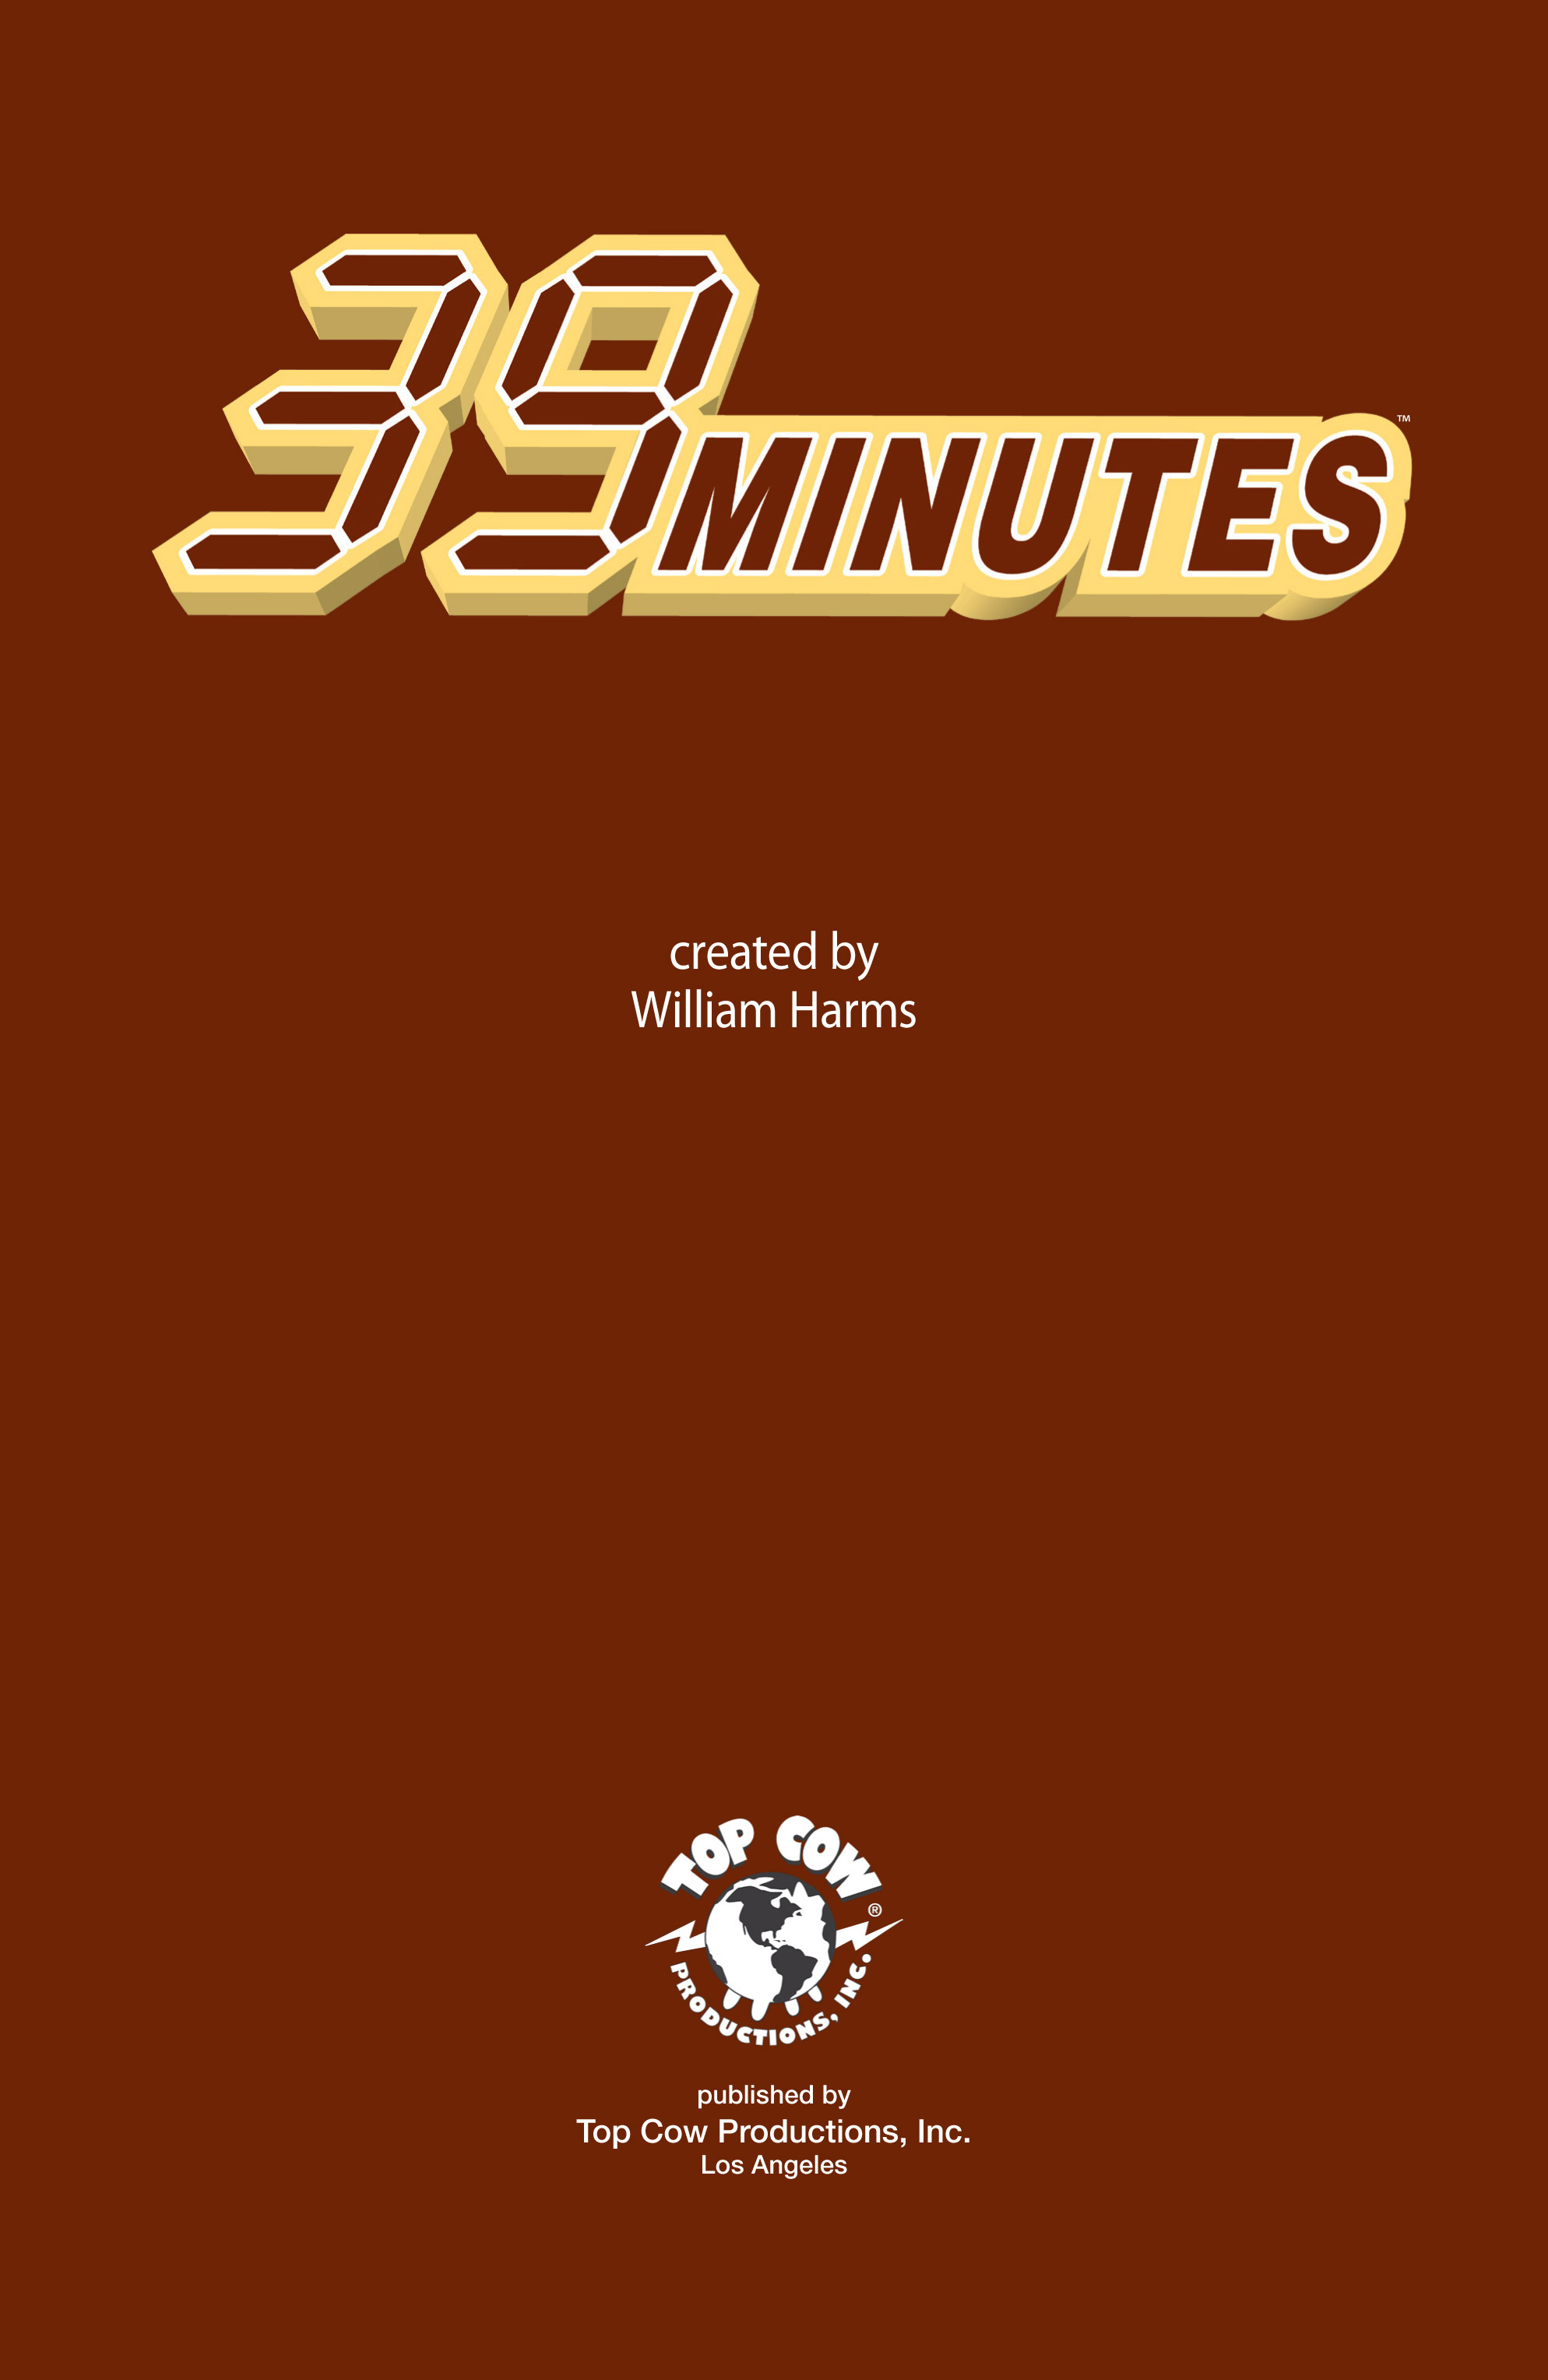 Read online 39 Minutes comic -  Issue # TPB - 2